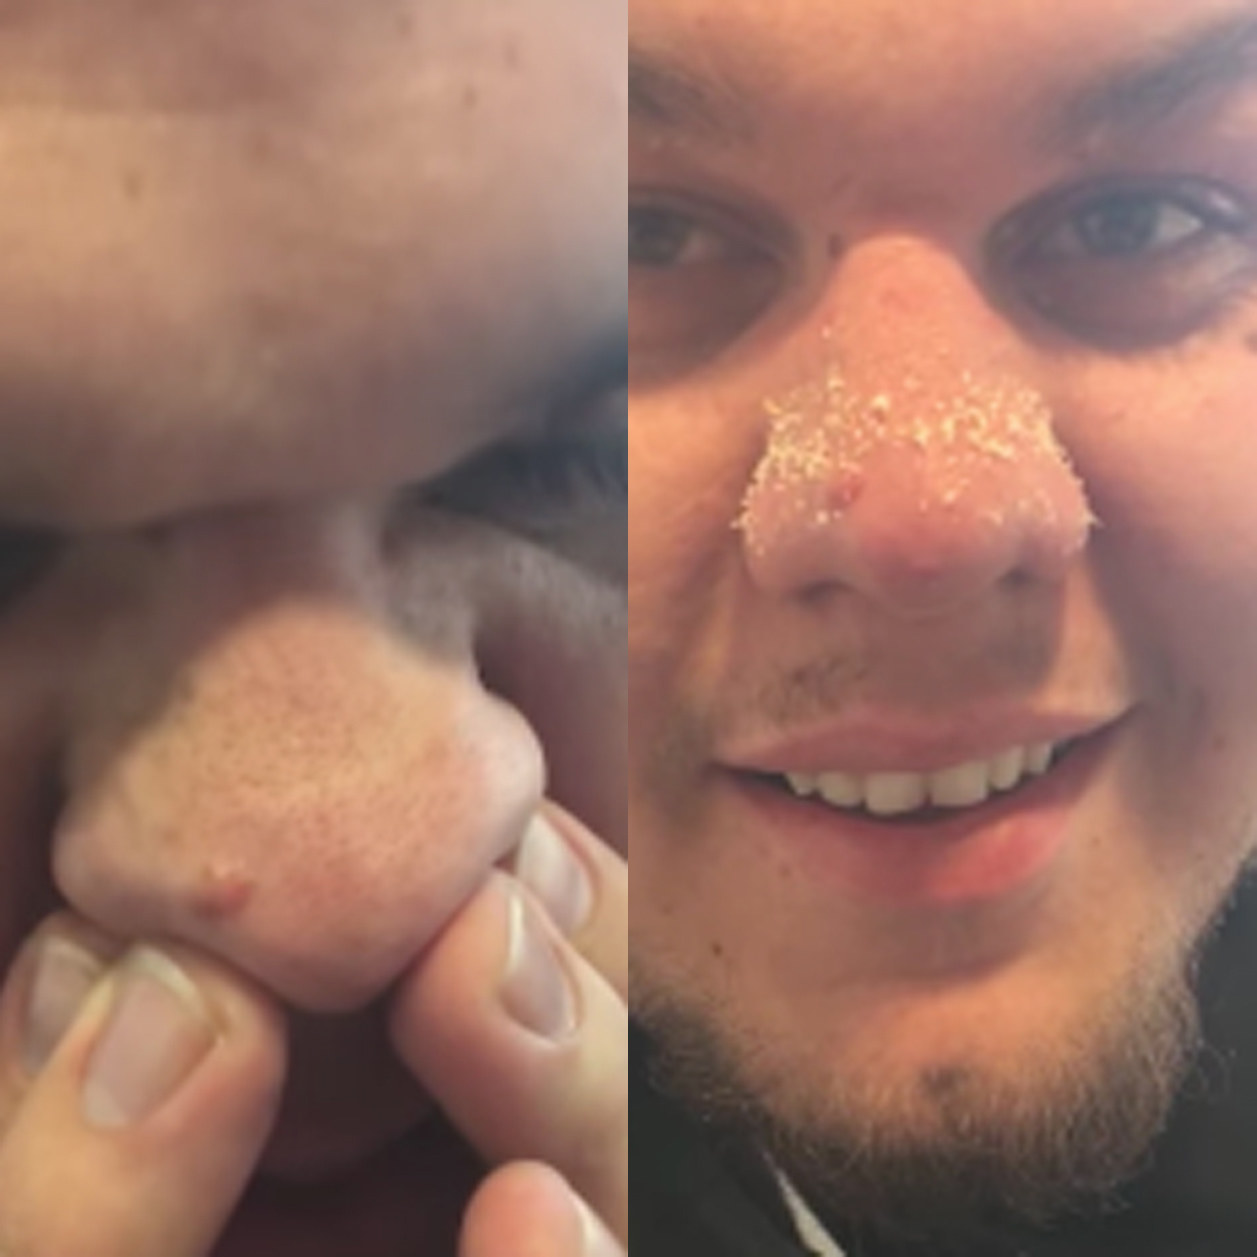 This Guy's Gross Blackhead Is Nothing Short